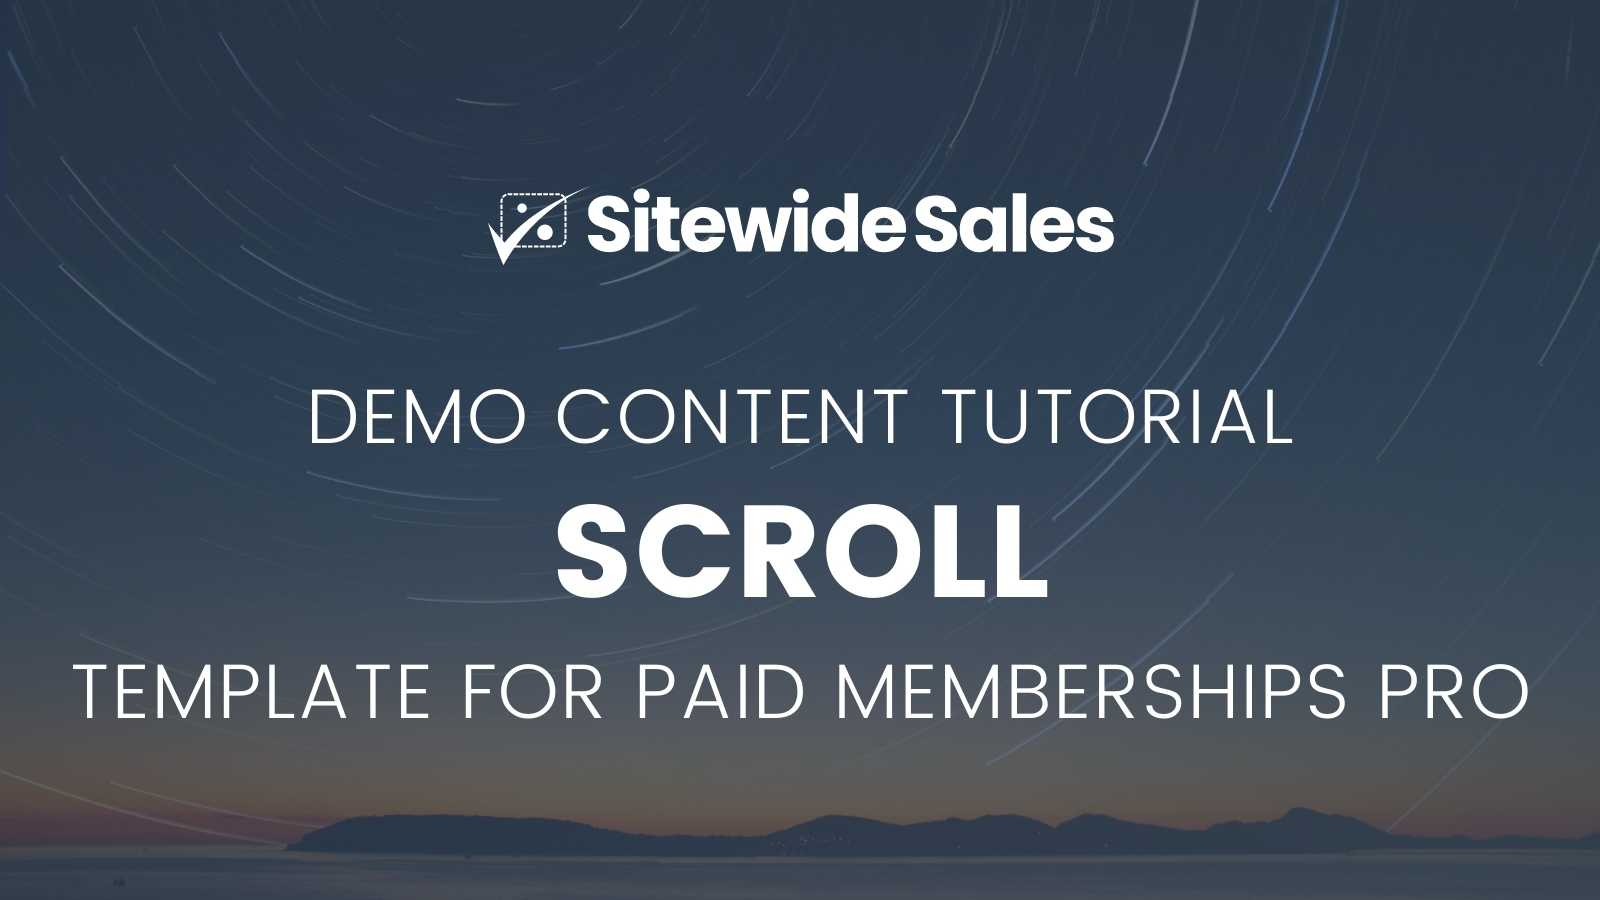 Scroll Template for Paid Memberships Pro: Sitewide Sale Demo Content